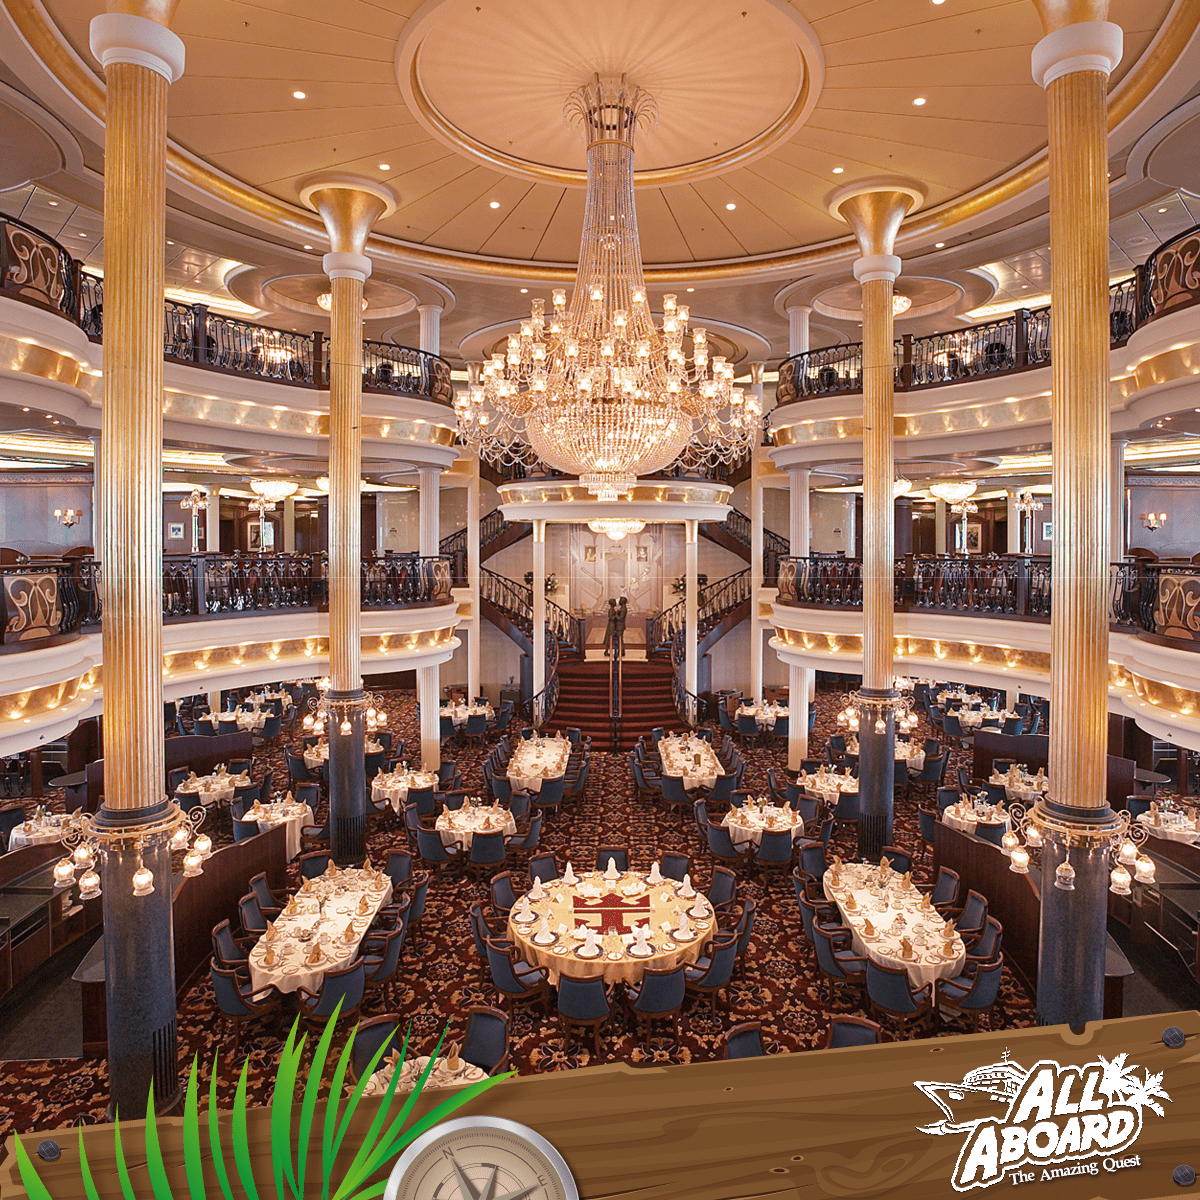 Dine in the Royal Mariner of the Seas' grand dining zone for a dining experience fit for royalty!